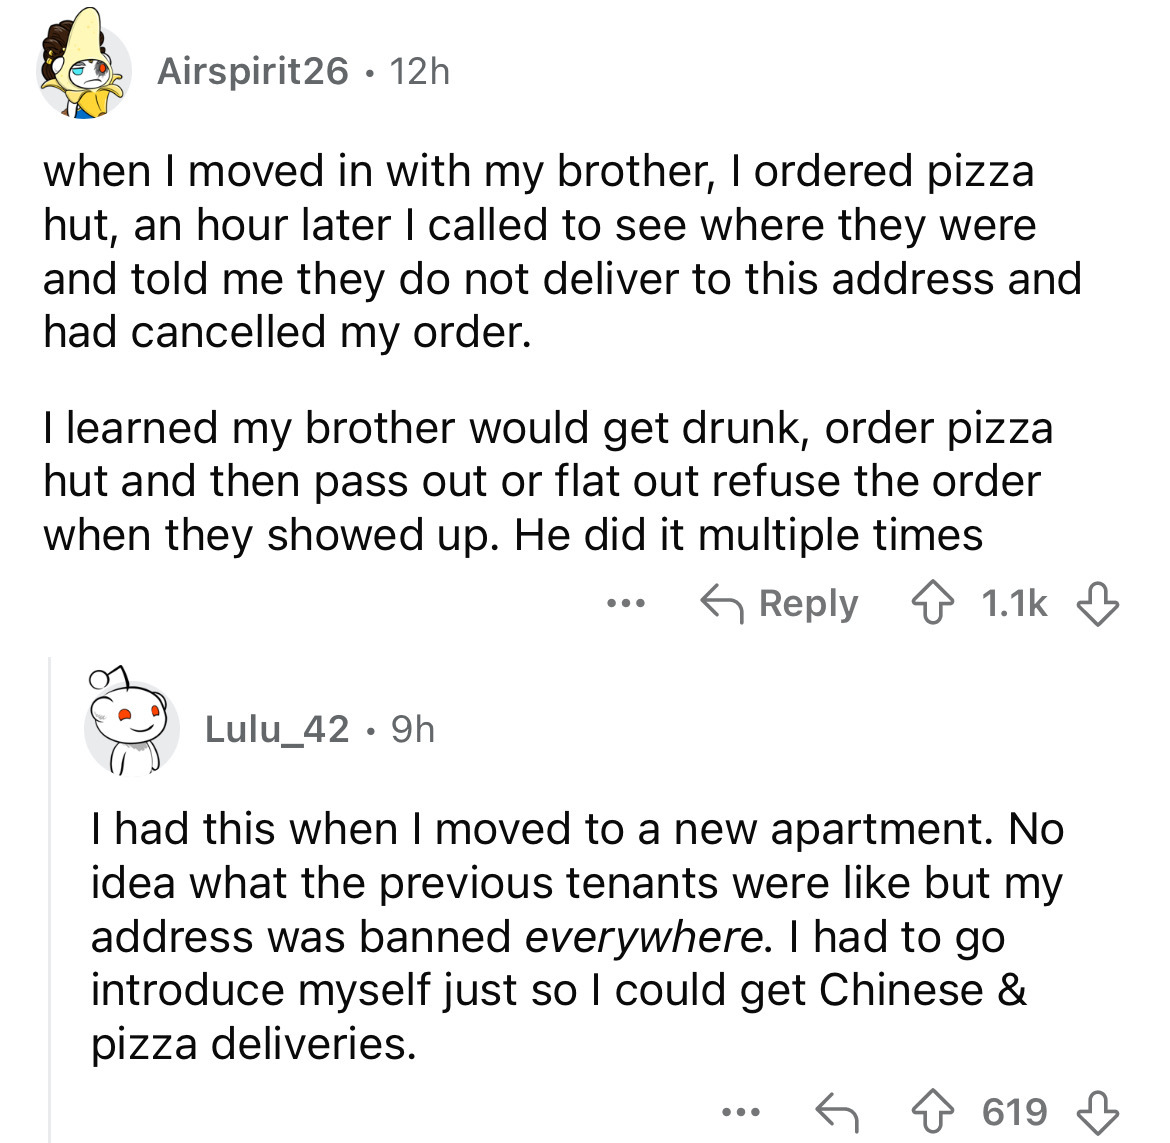 screenshot - Airspirit26. 12h when I moved in with my brother, I ordered pizza hut, an hour later I called to see where they were and told me they do not deliver to this address and had cancelled my order. I learned my brother would get drunk, order pizza